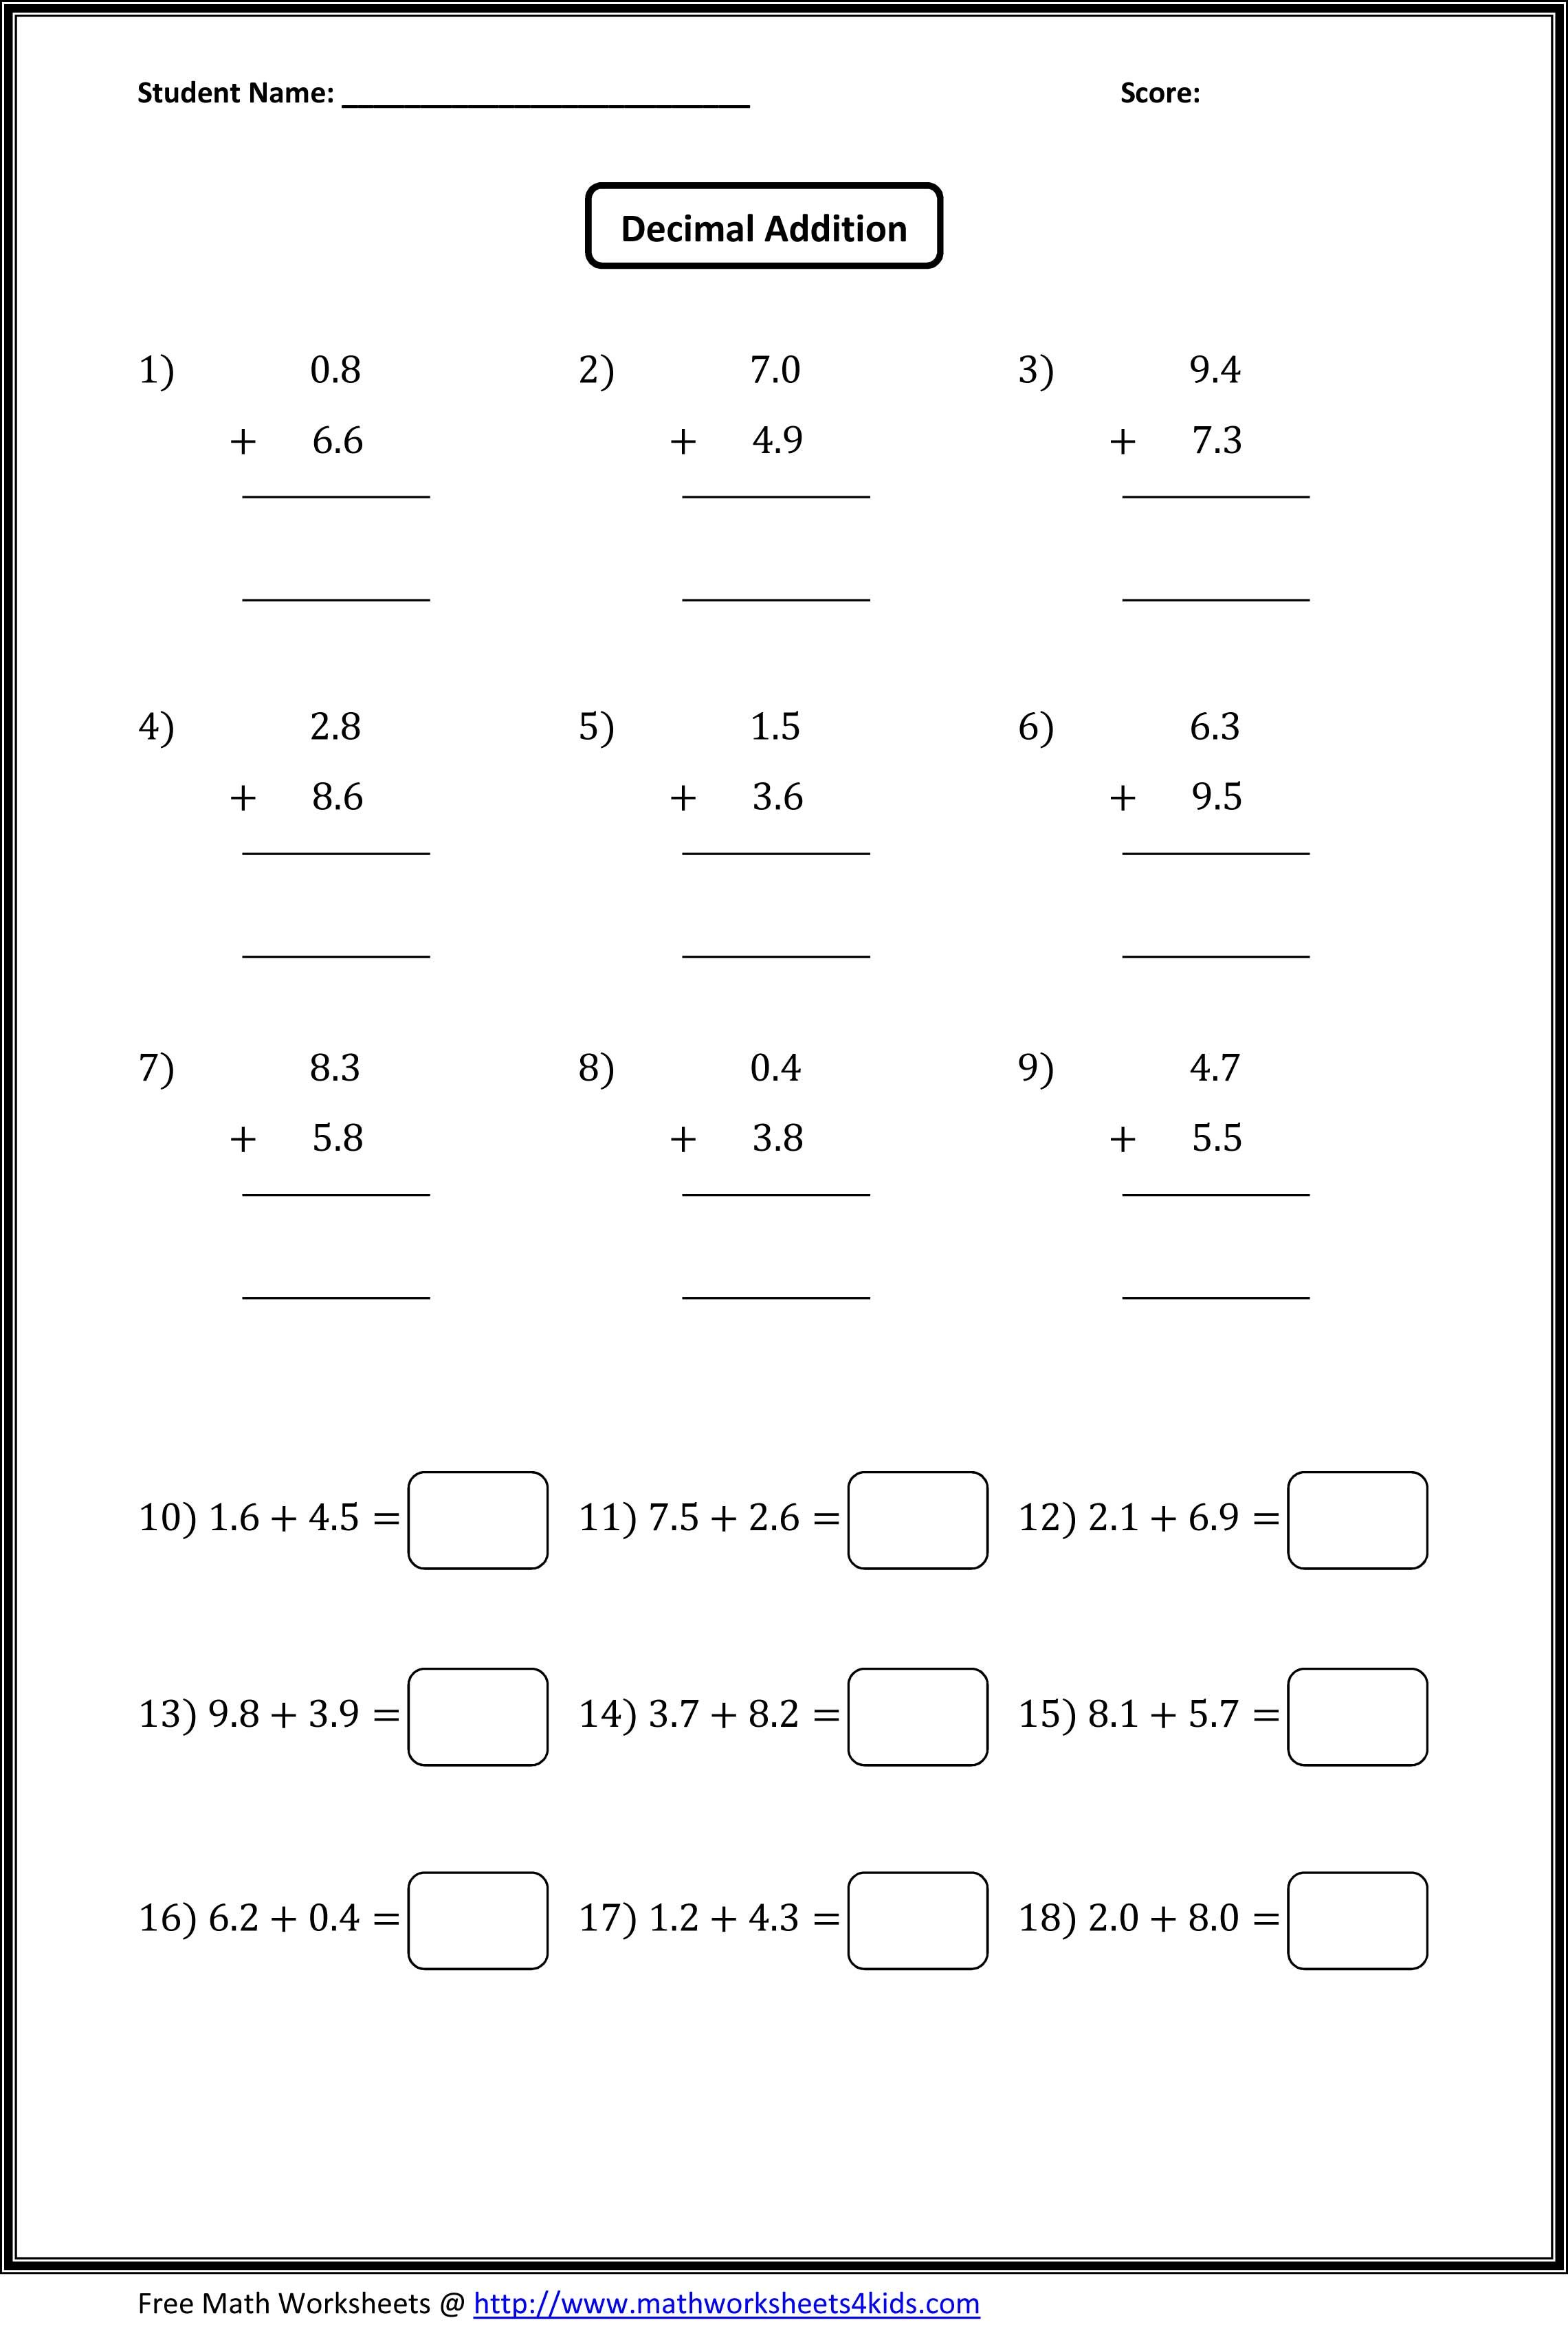 55 Adding With Decimals Worksheets 13